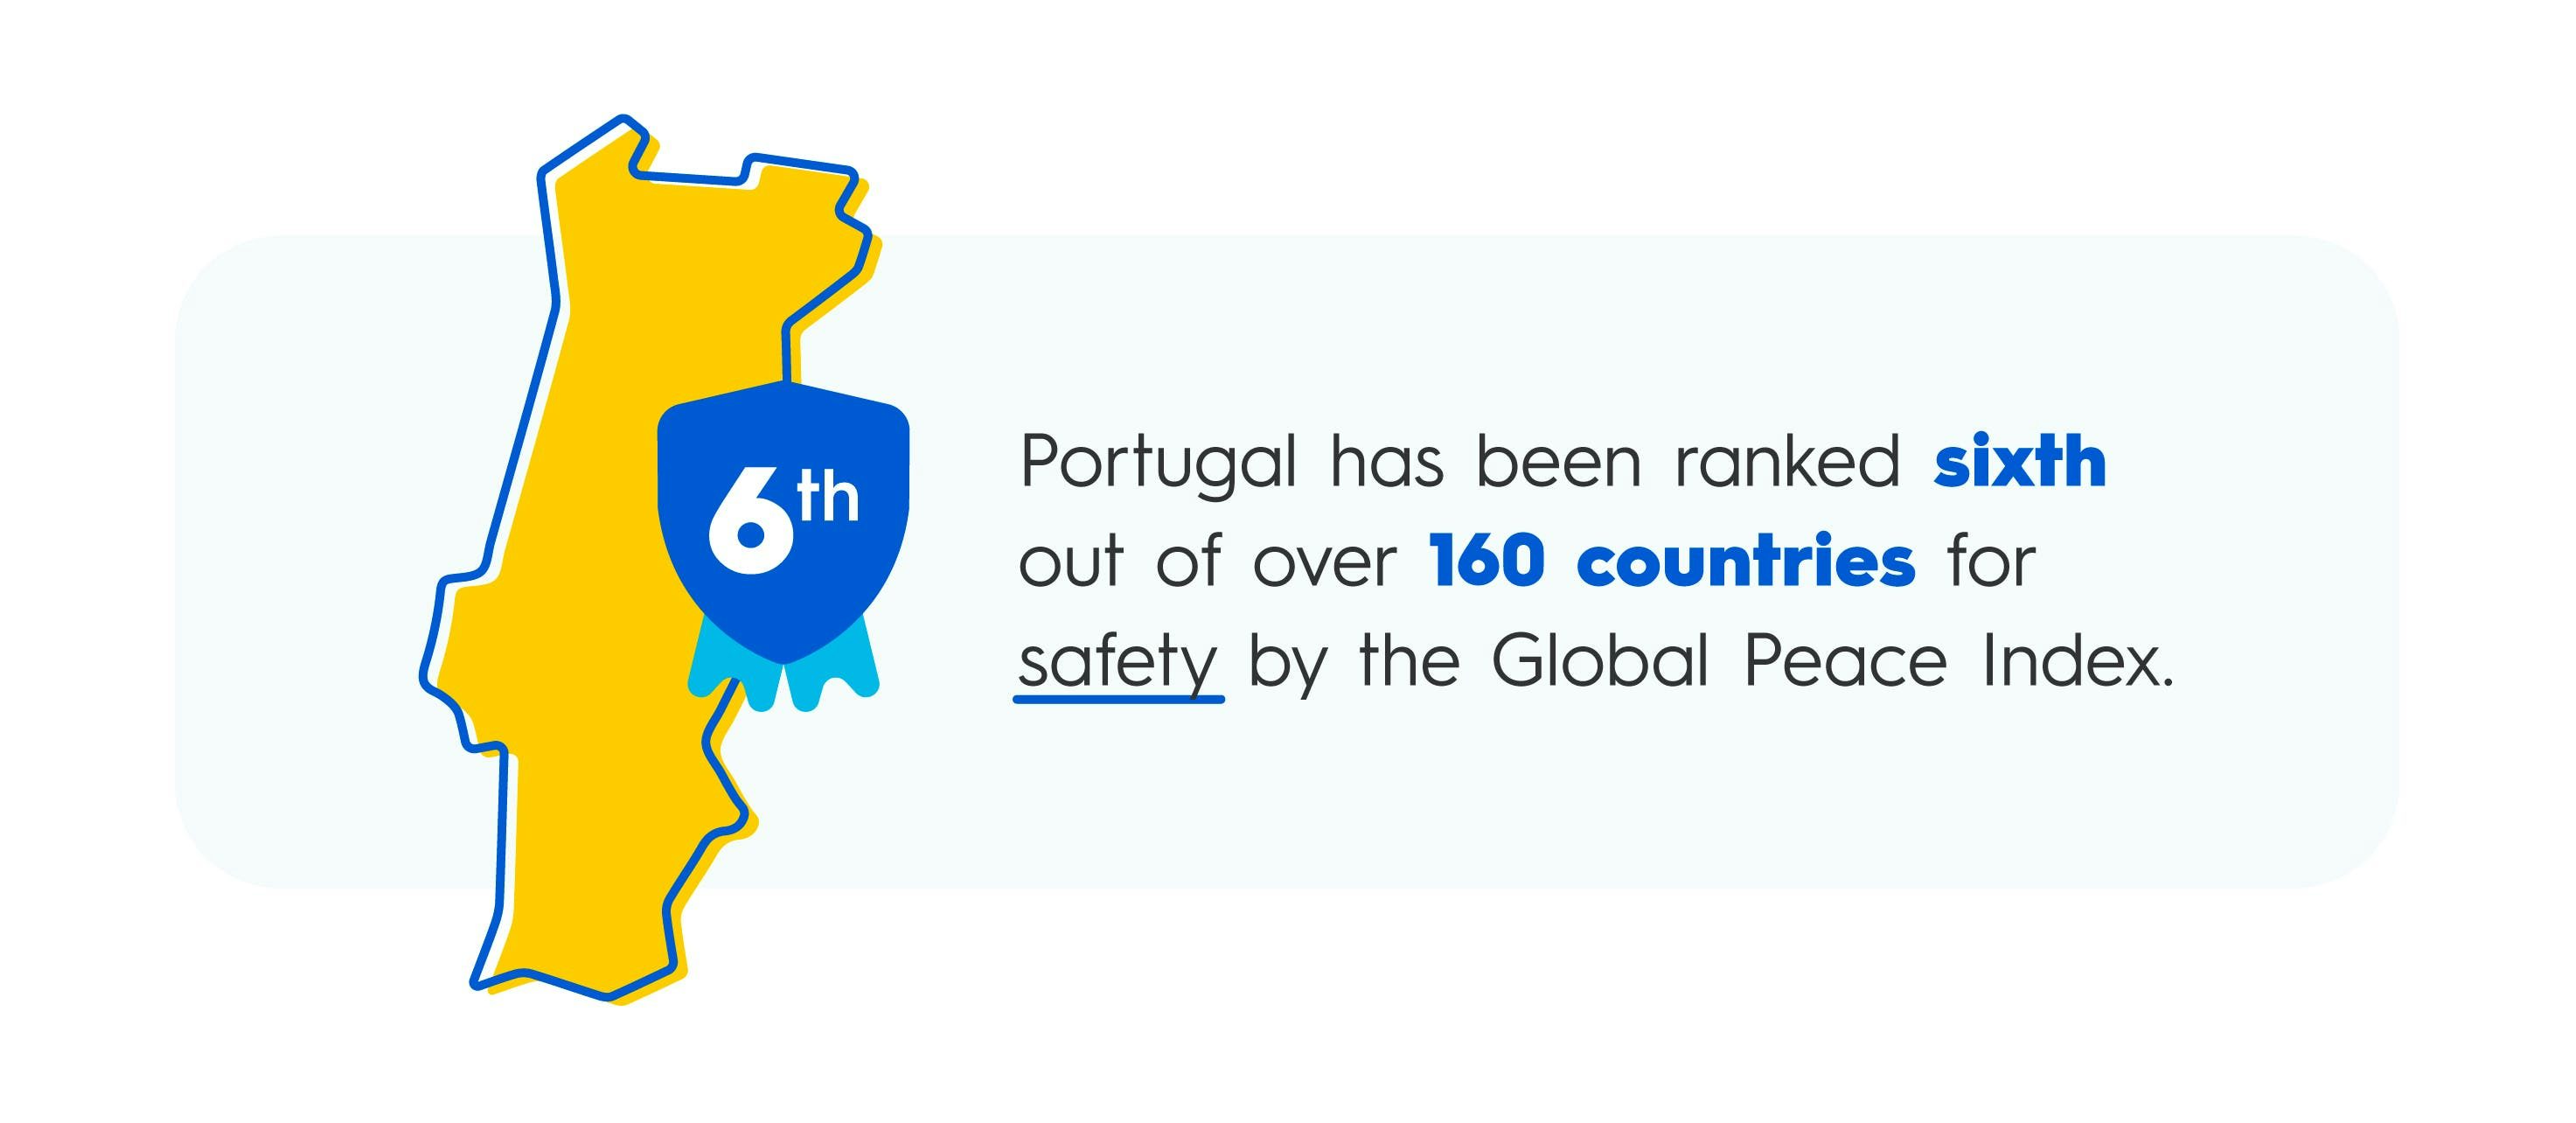 A graphic explaining that Portugal is ranked sixth out of 160 countries for safety